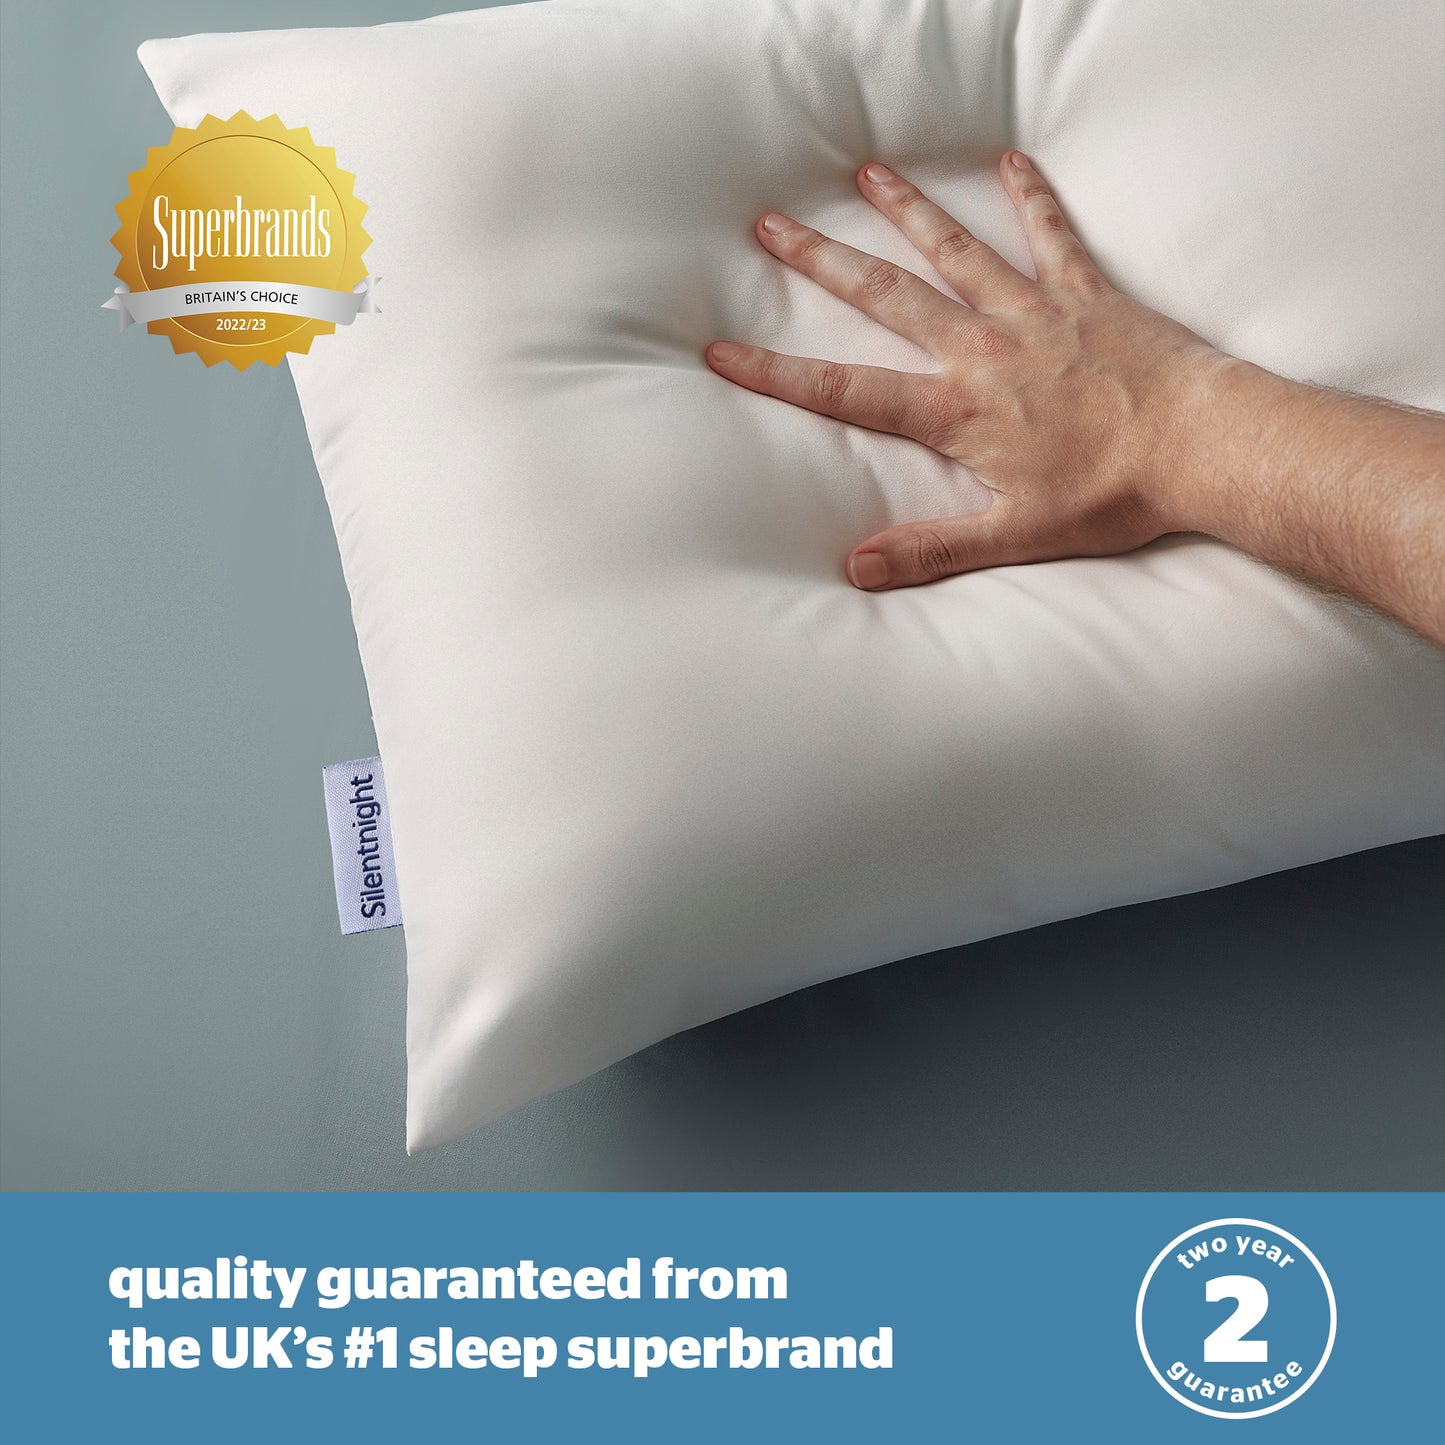 Orthopaedic Support Pillow With Foam